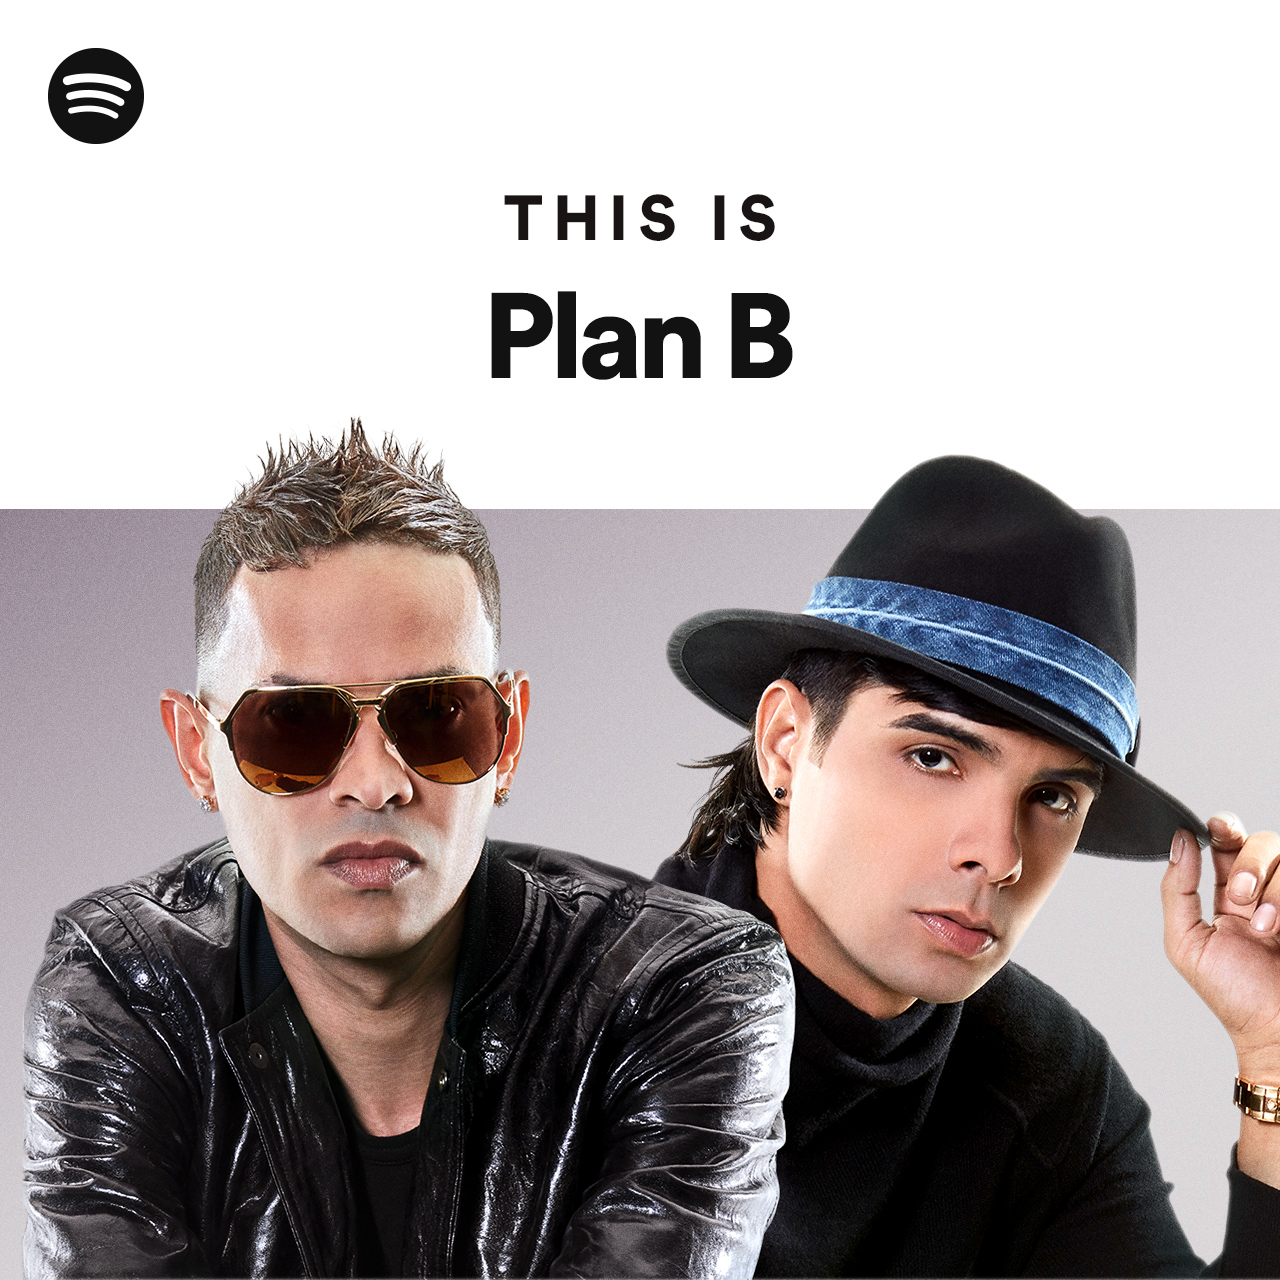 This Is Plan B